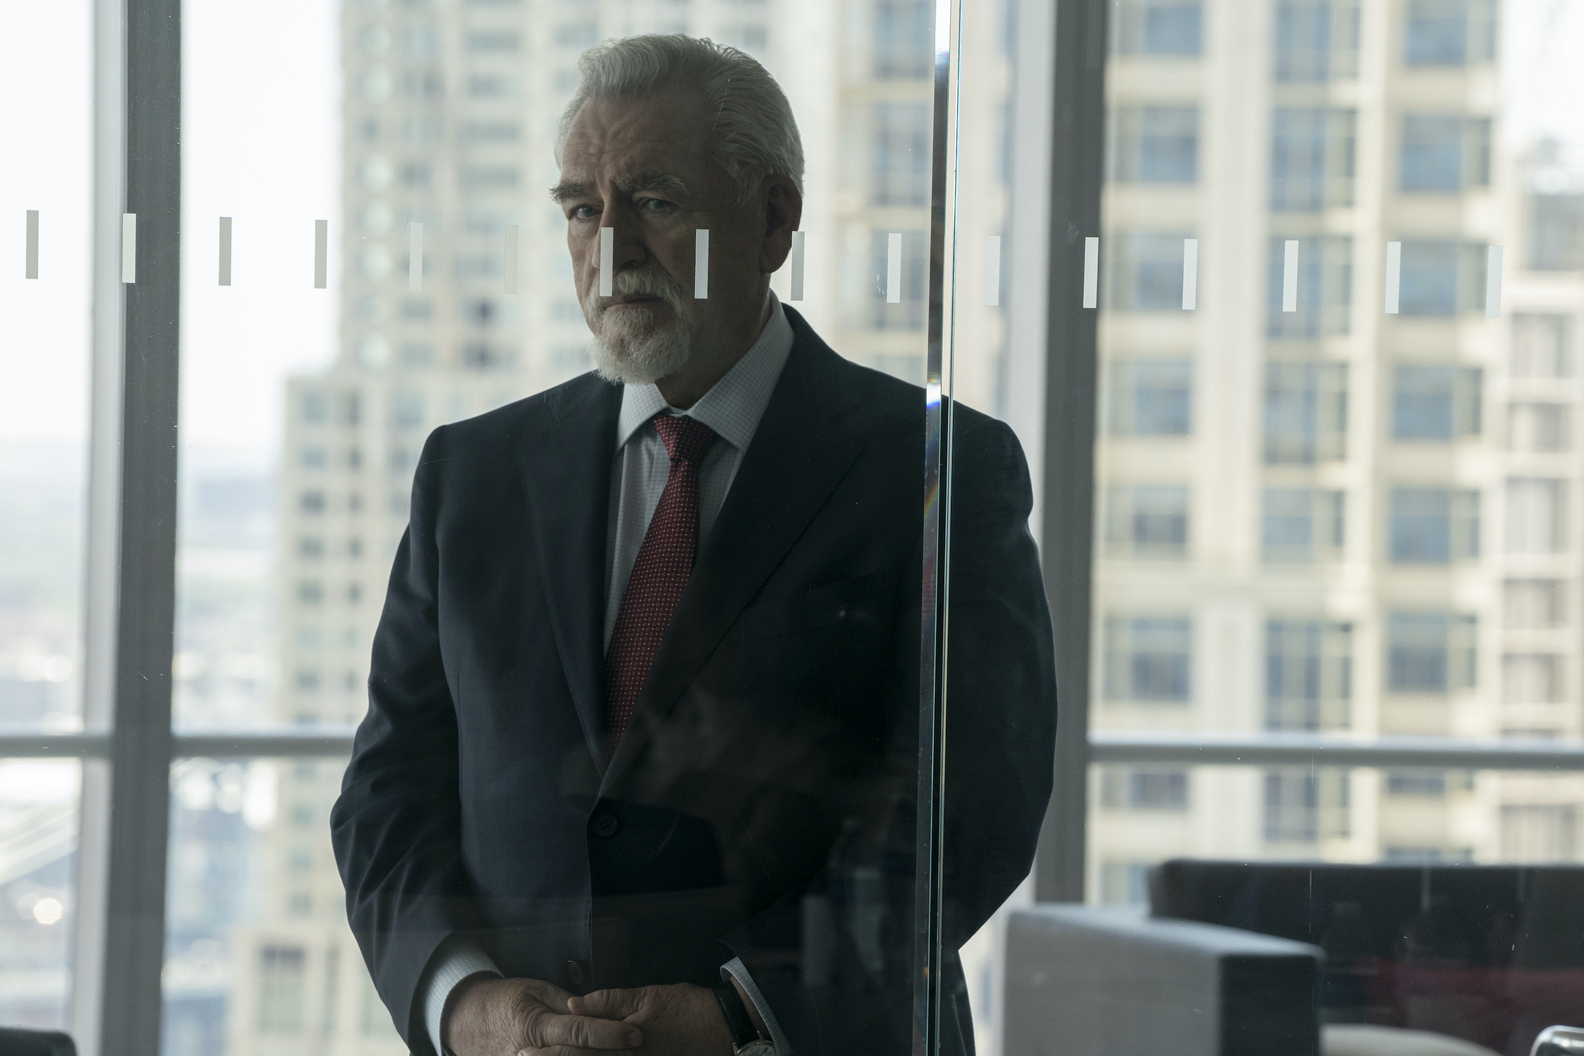 Logan Roy, played by Brian Cox, intimidates the board of the company into voting his way. Photo courtesy of HBO